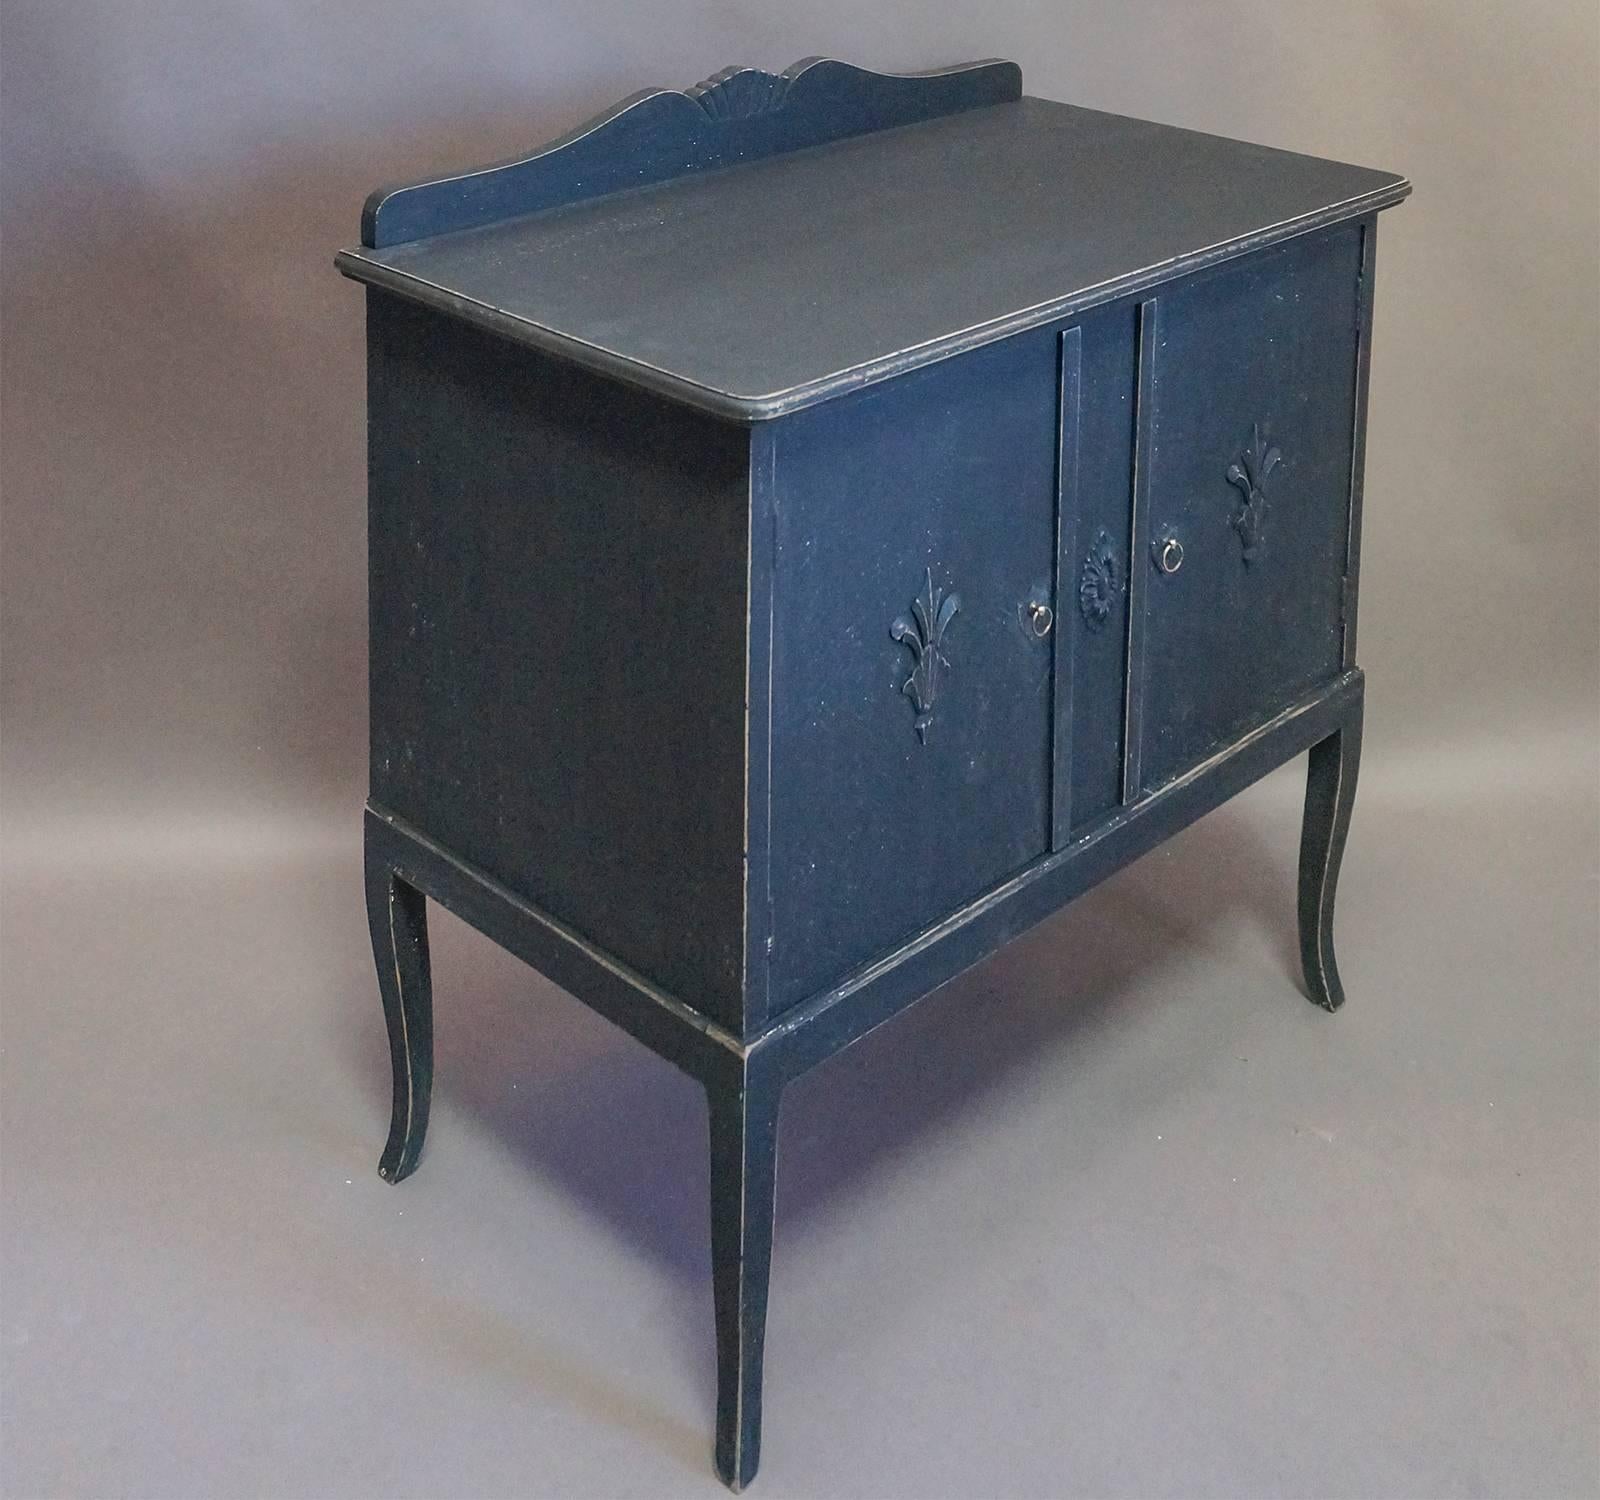 Small storage cabinet in black paint, Denmark circa 1860, with two doors and two interior shelves.